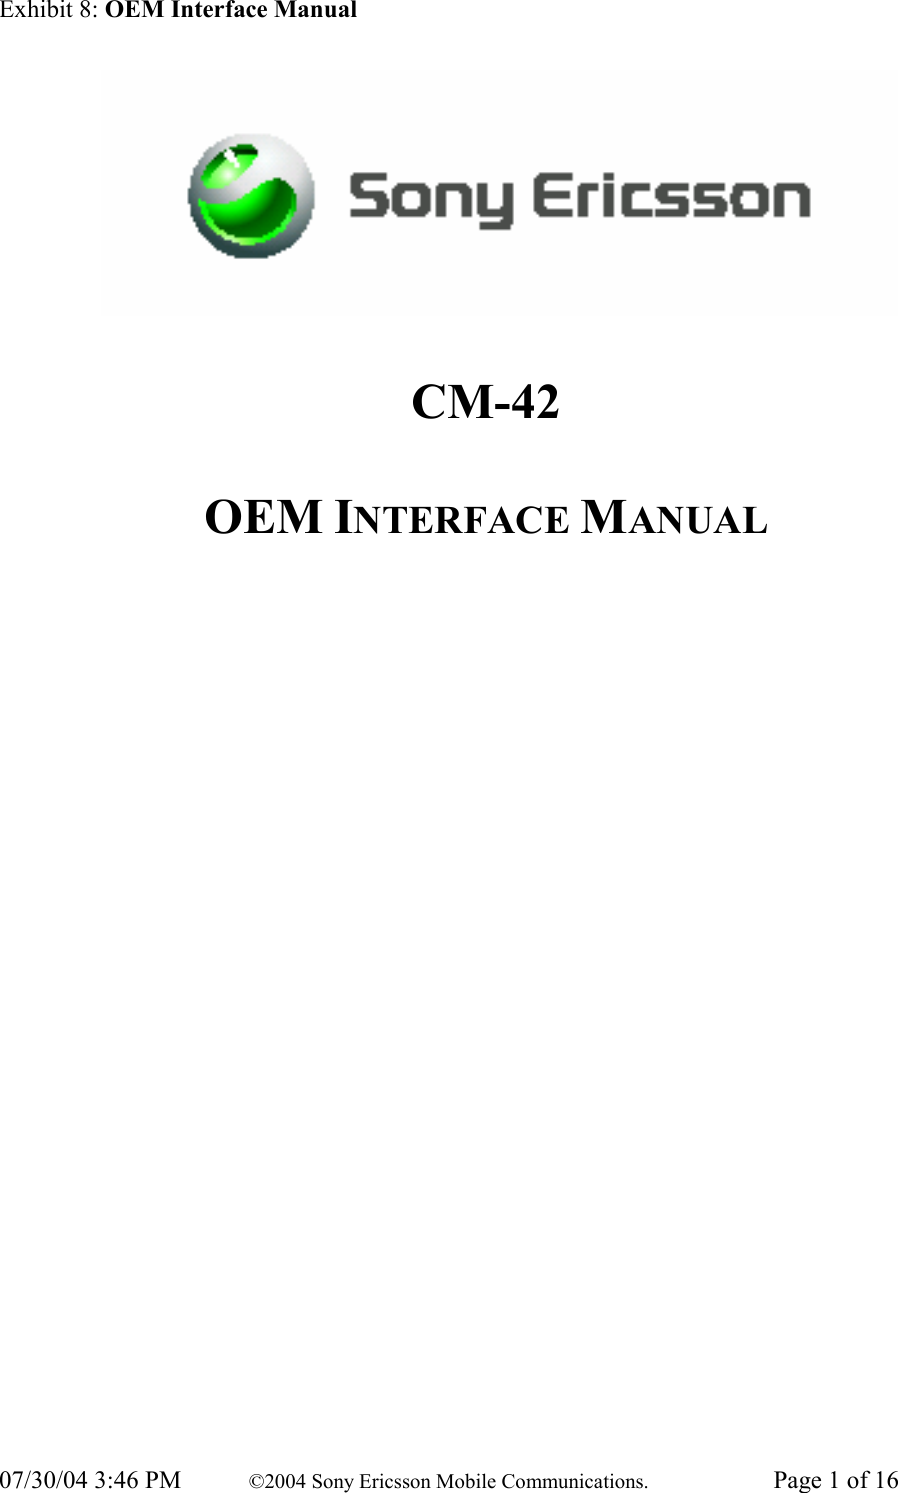 Exhibit 8: OEM Interface Manual 07/30/04 3:46 PM  ©2004 Sony Ericsson Mobile Communications.  Page 1 of 16        CM-42  OEM INTERFACE MANUAL         